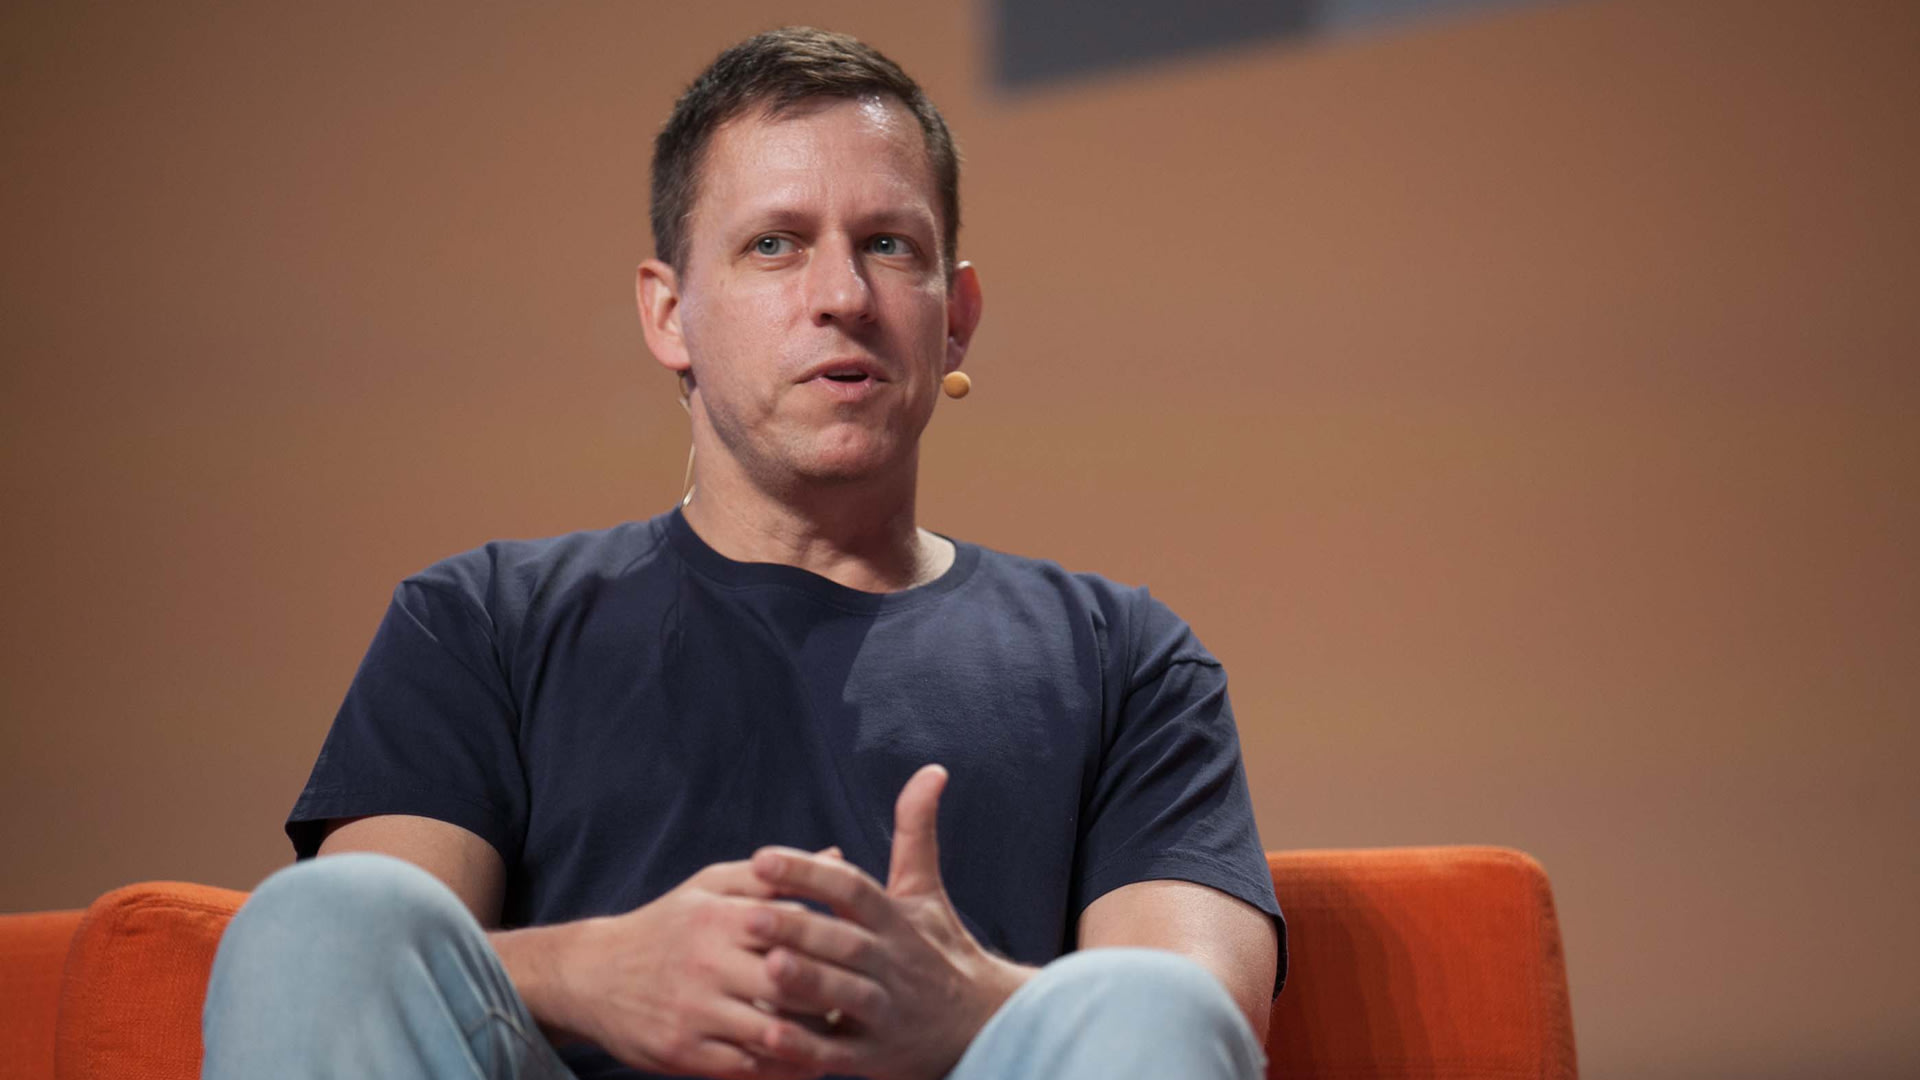 Report: Peter Thiel will not try to buy Gawker’s assets